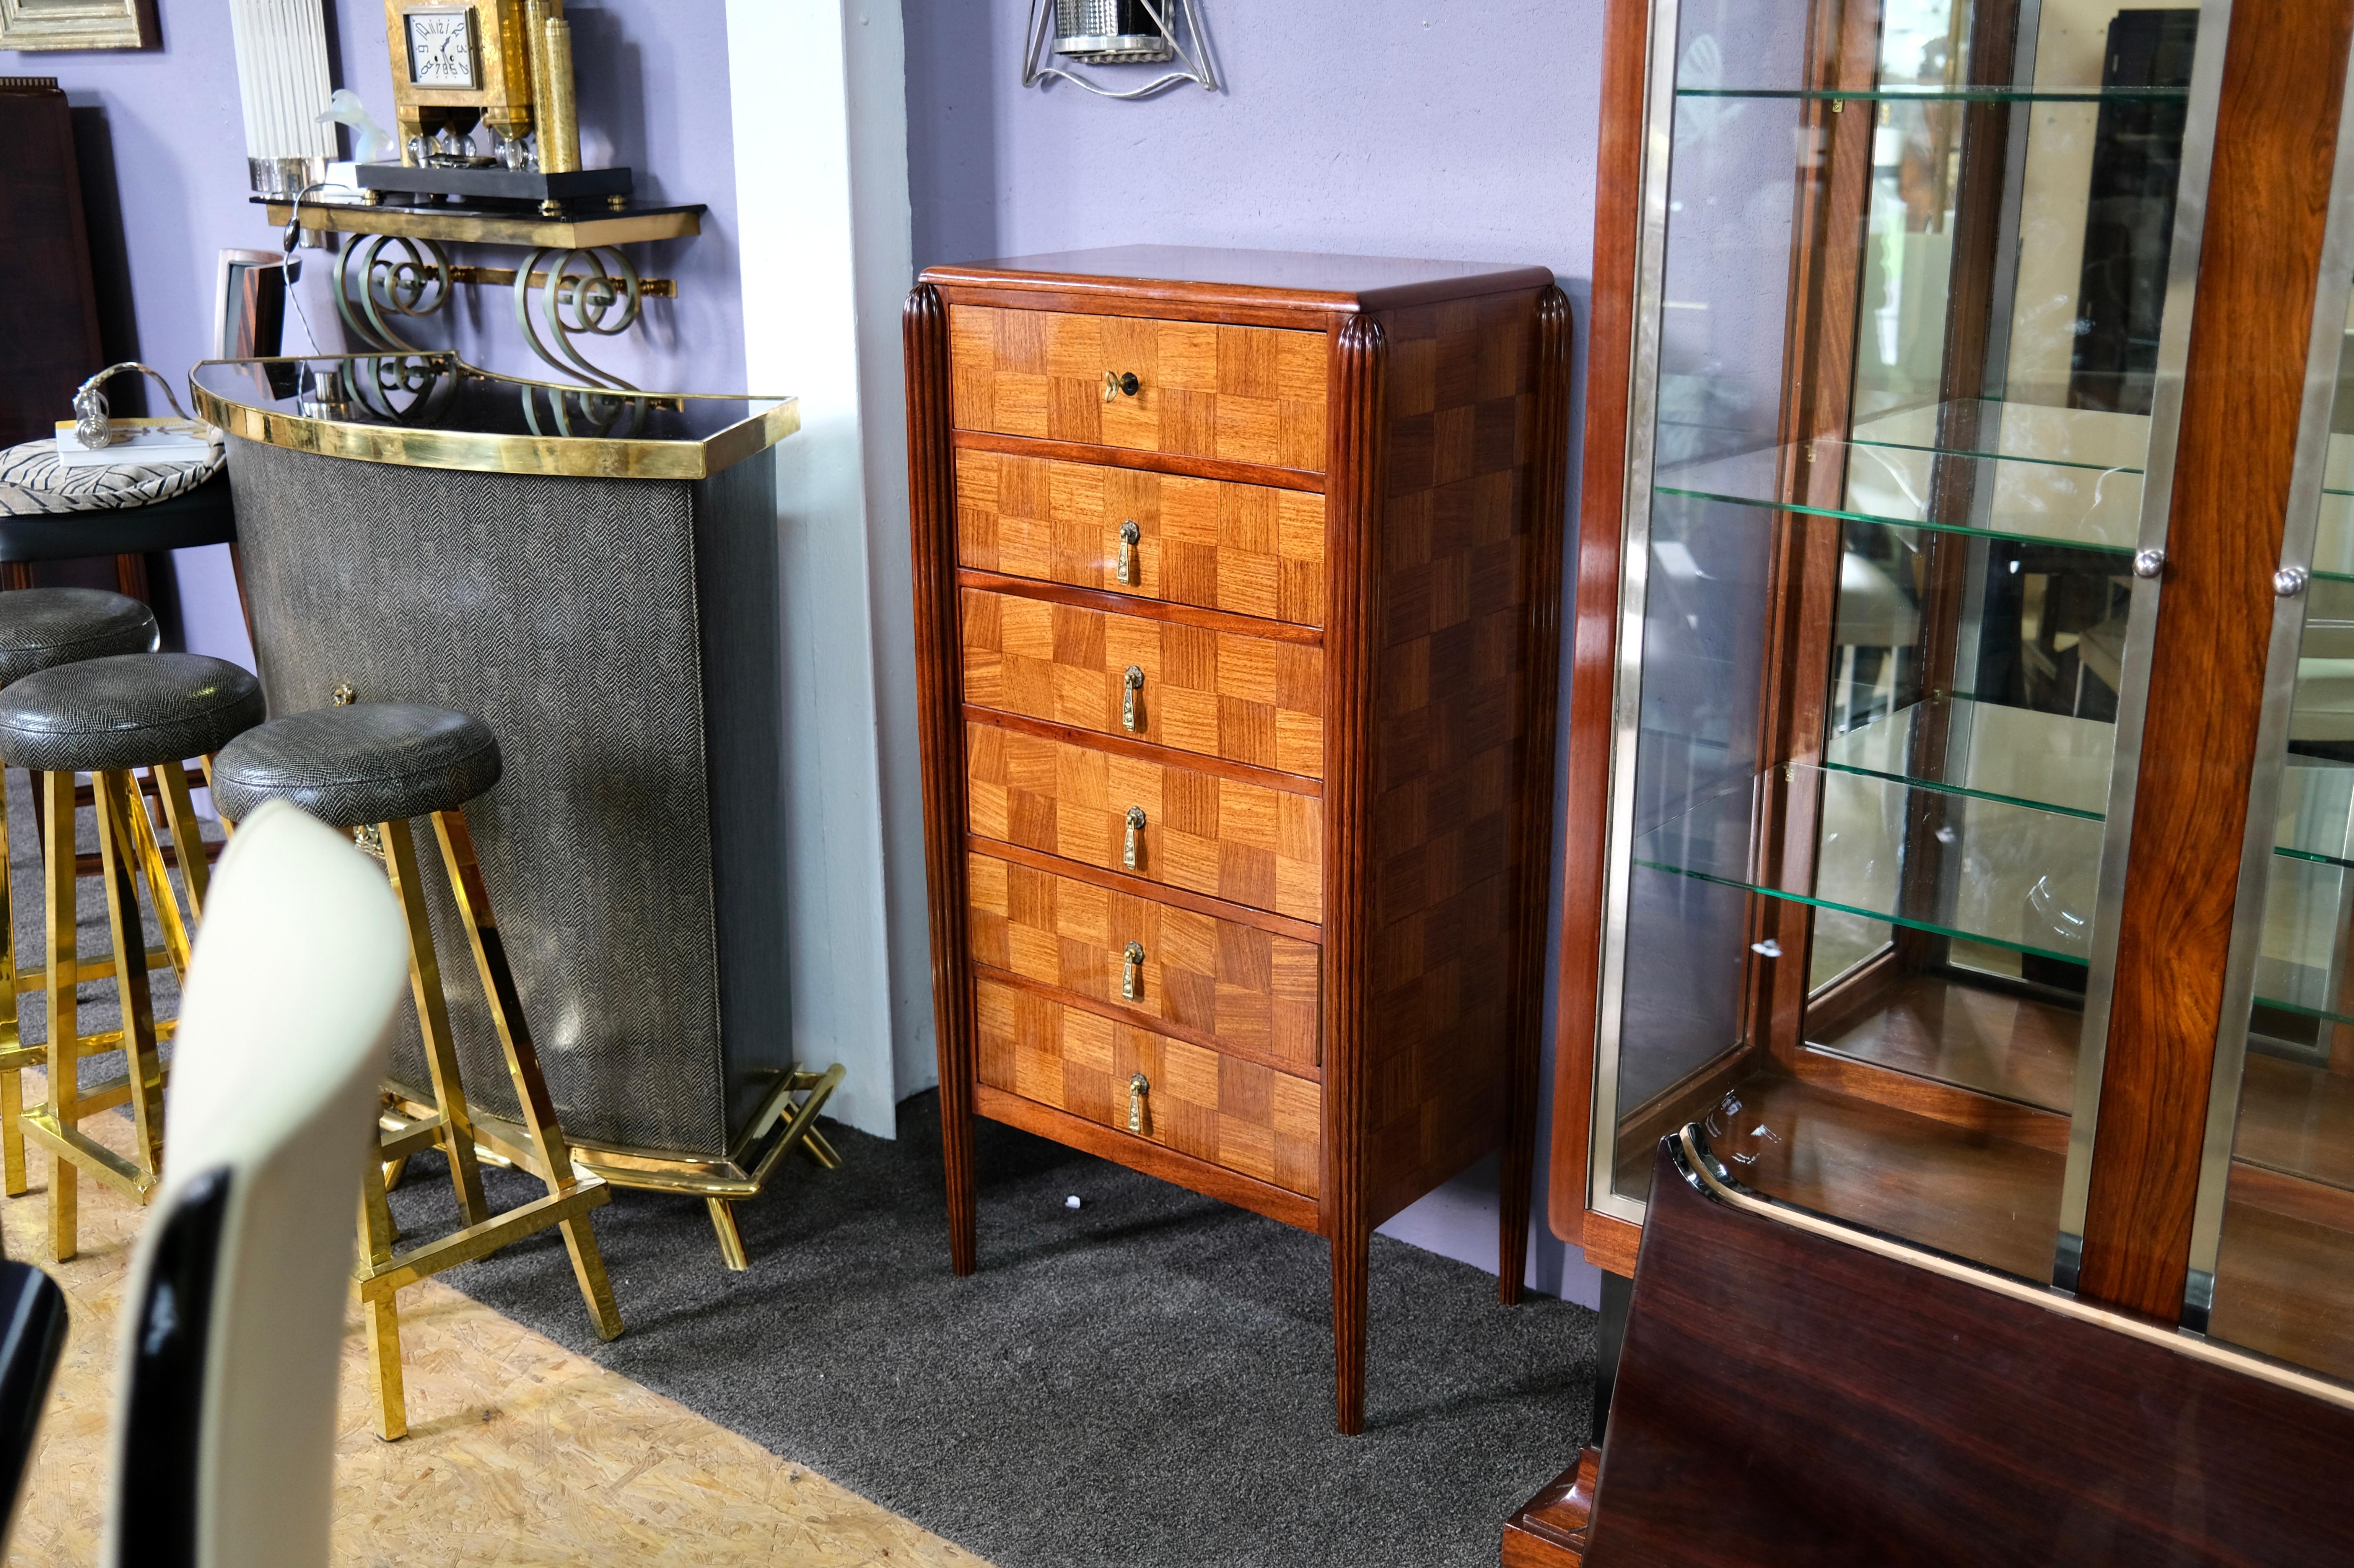 High chest of drawers
wooden body, hand polished shellac
probably stained ash and mahogany
fluted legs

Early Art Déco, France around 1925

Dimensions:
Width: 62 cm
Height: 122 cm
Depth: 40 cm